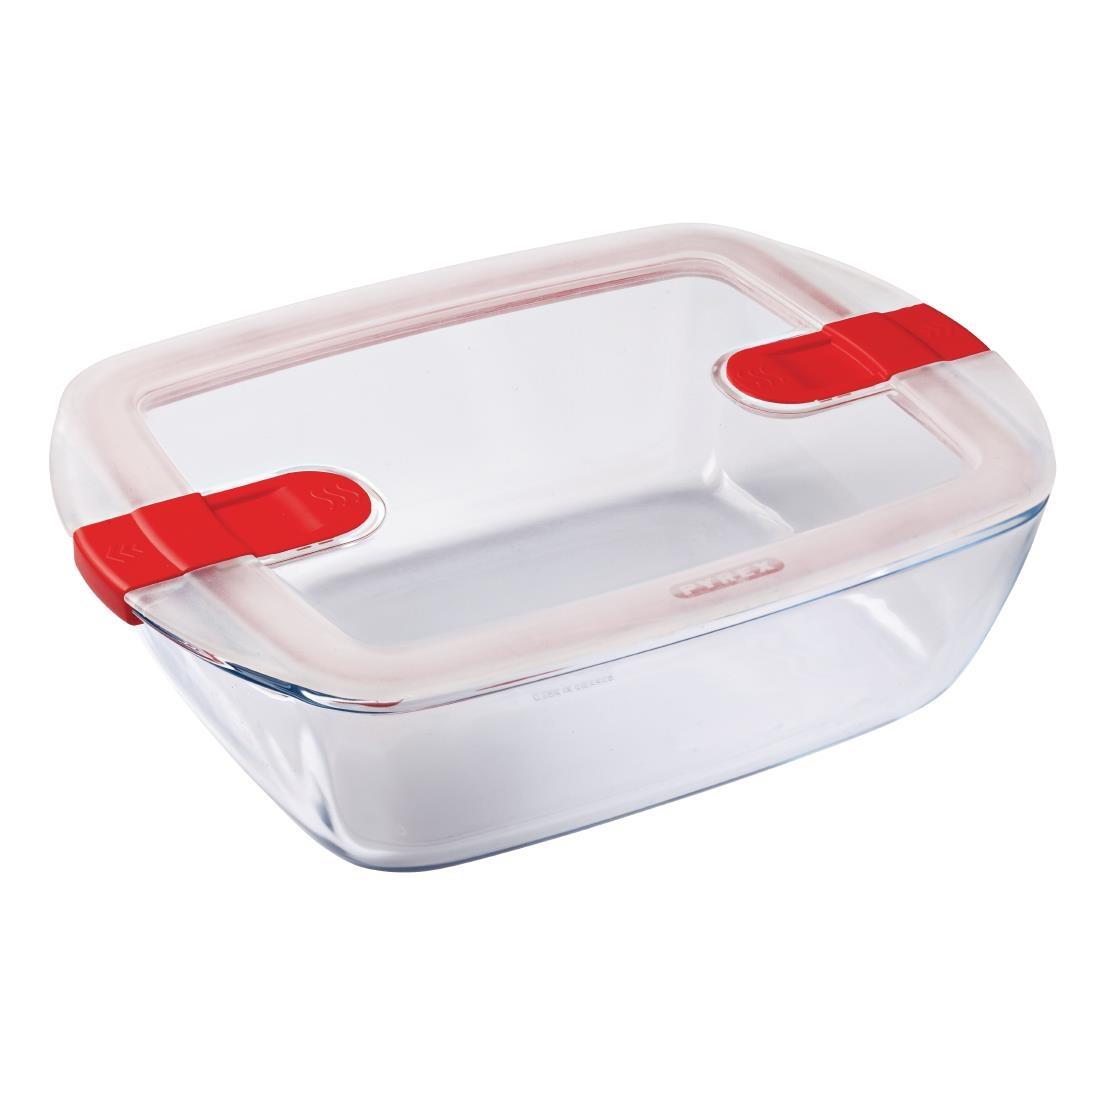 K463 - Stewart Seal Fresh Picnic Pack Container 3.75Ltr - K463